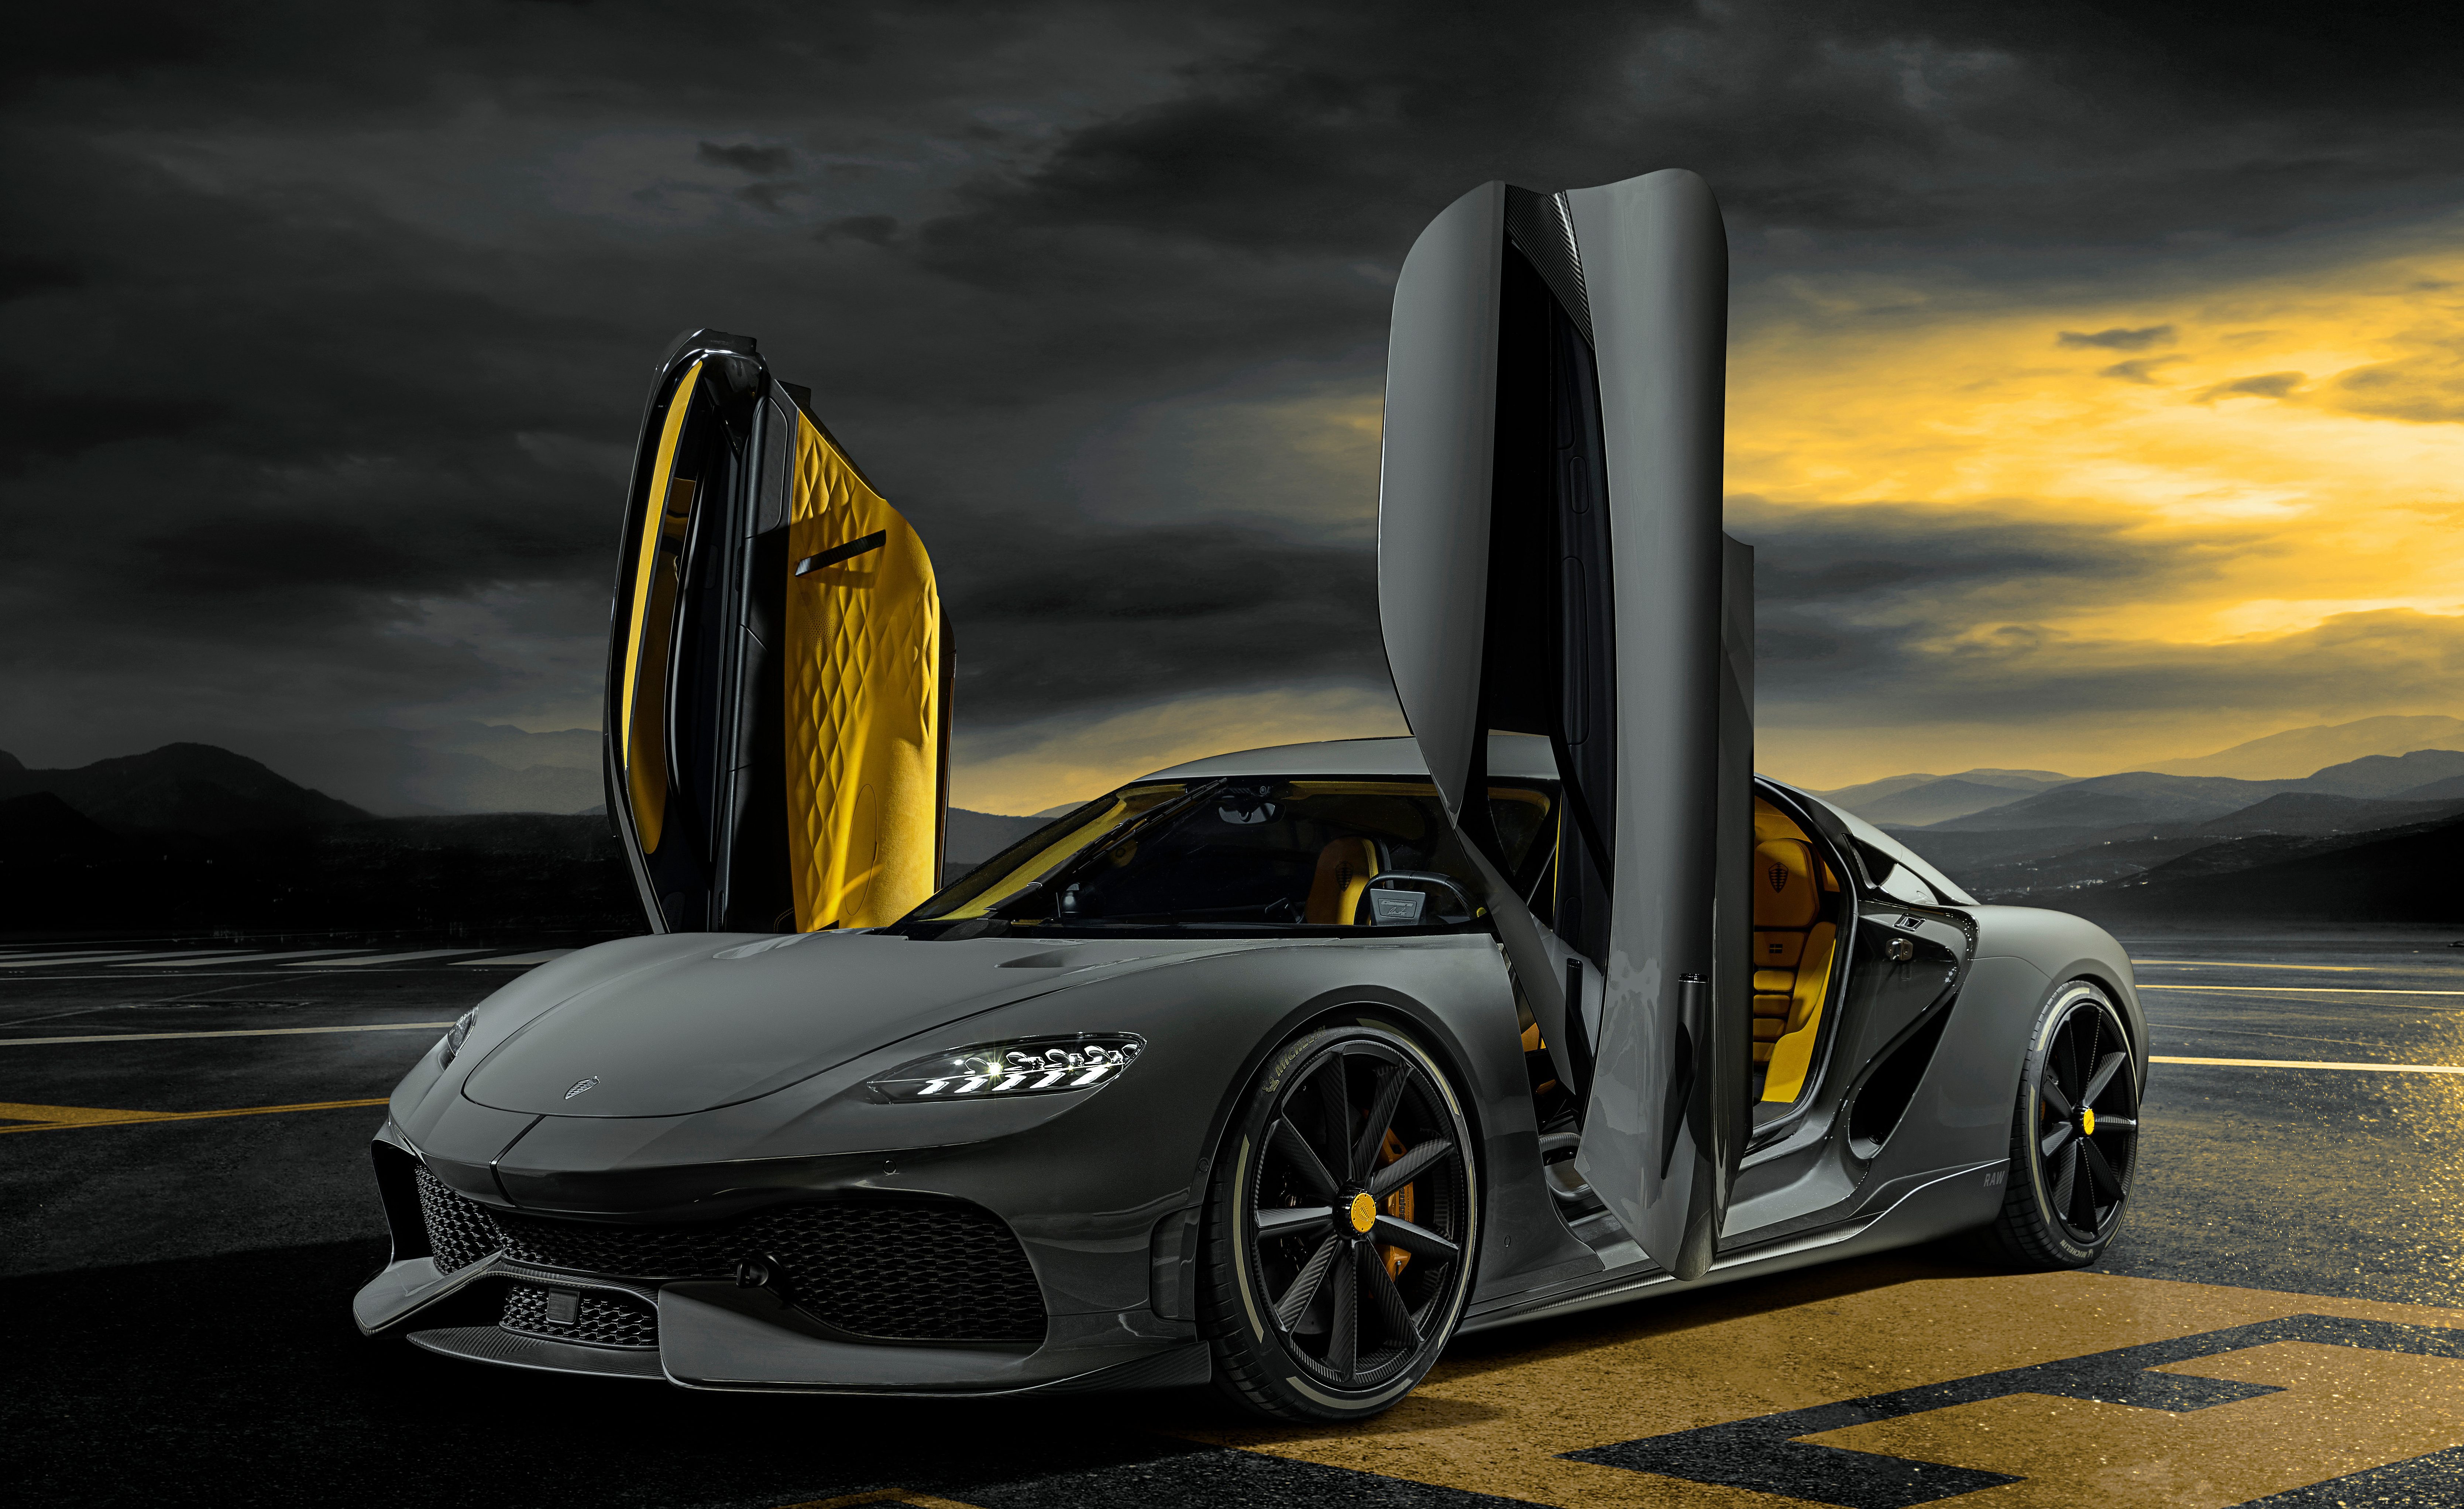 2560x1440 Koenigsegg Gemera 2020 1440p Resolution Hd 4k Wallpapers Images Backgrounds Photos And Pictures